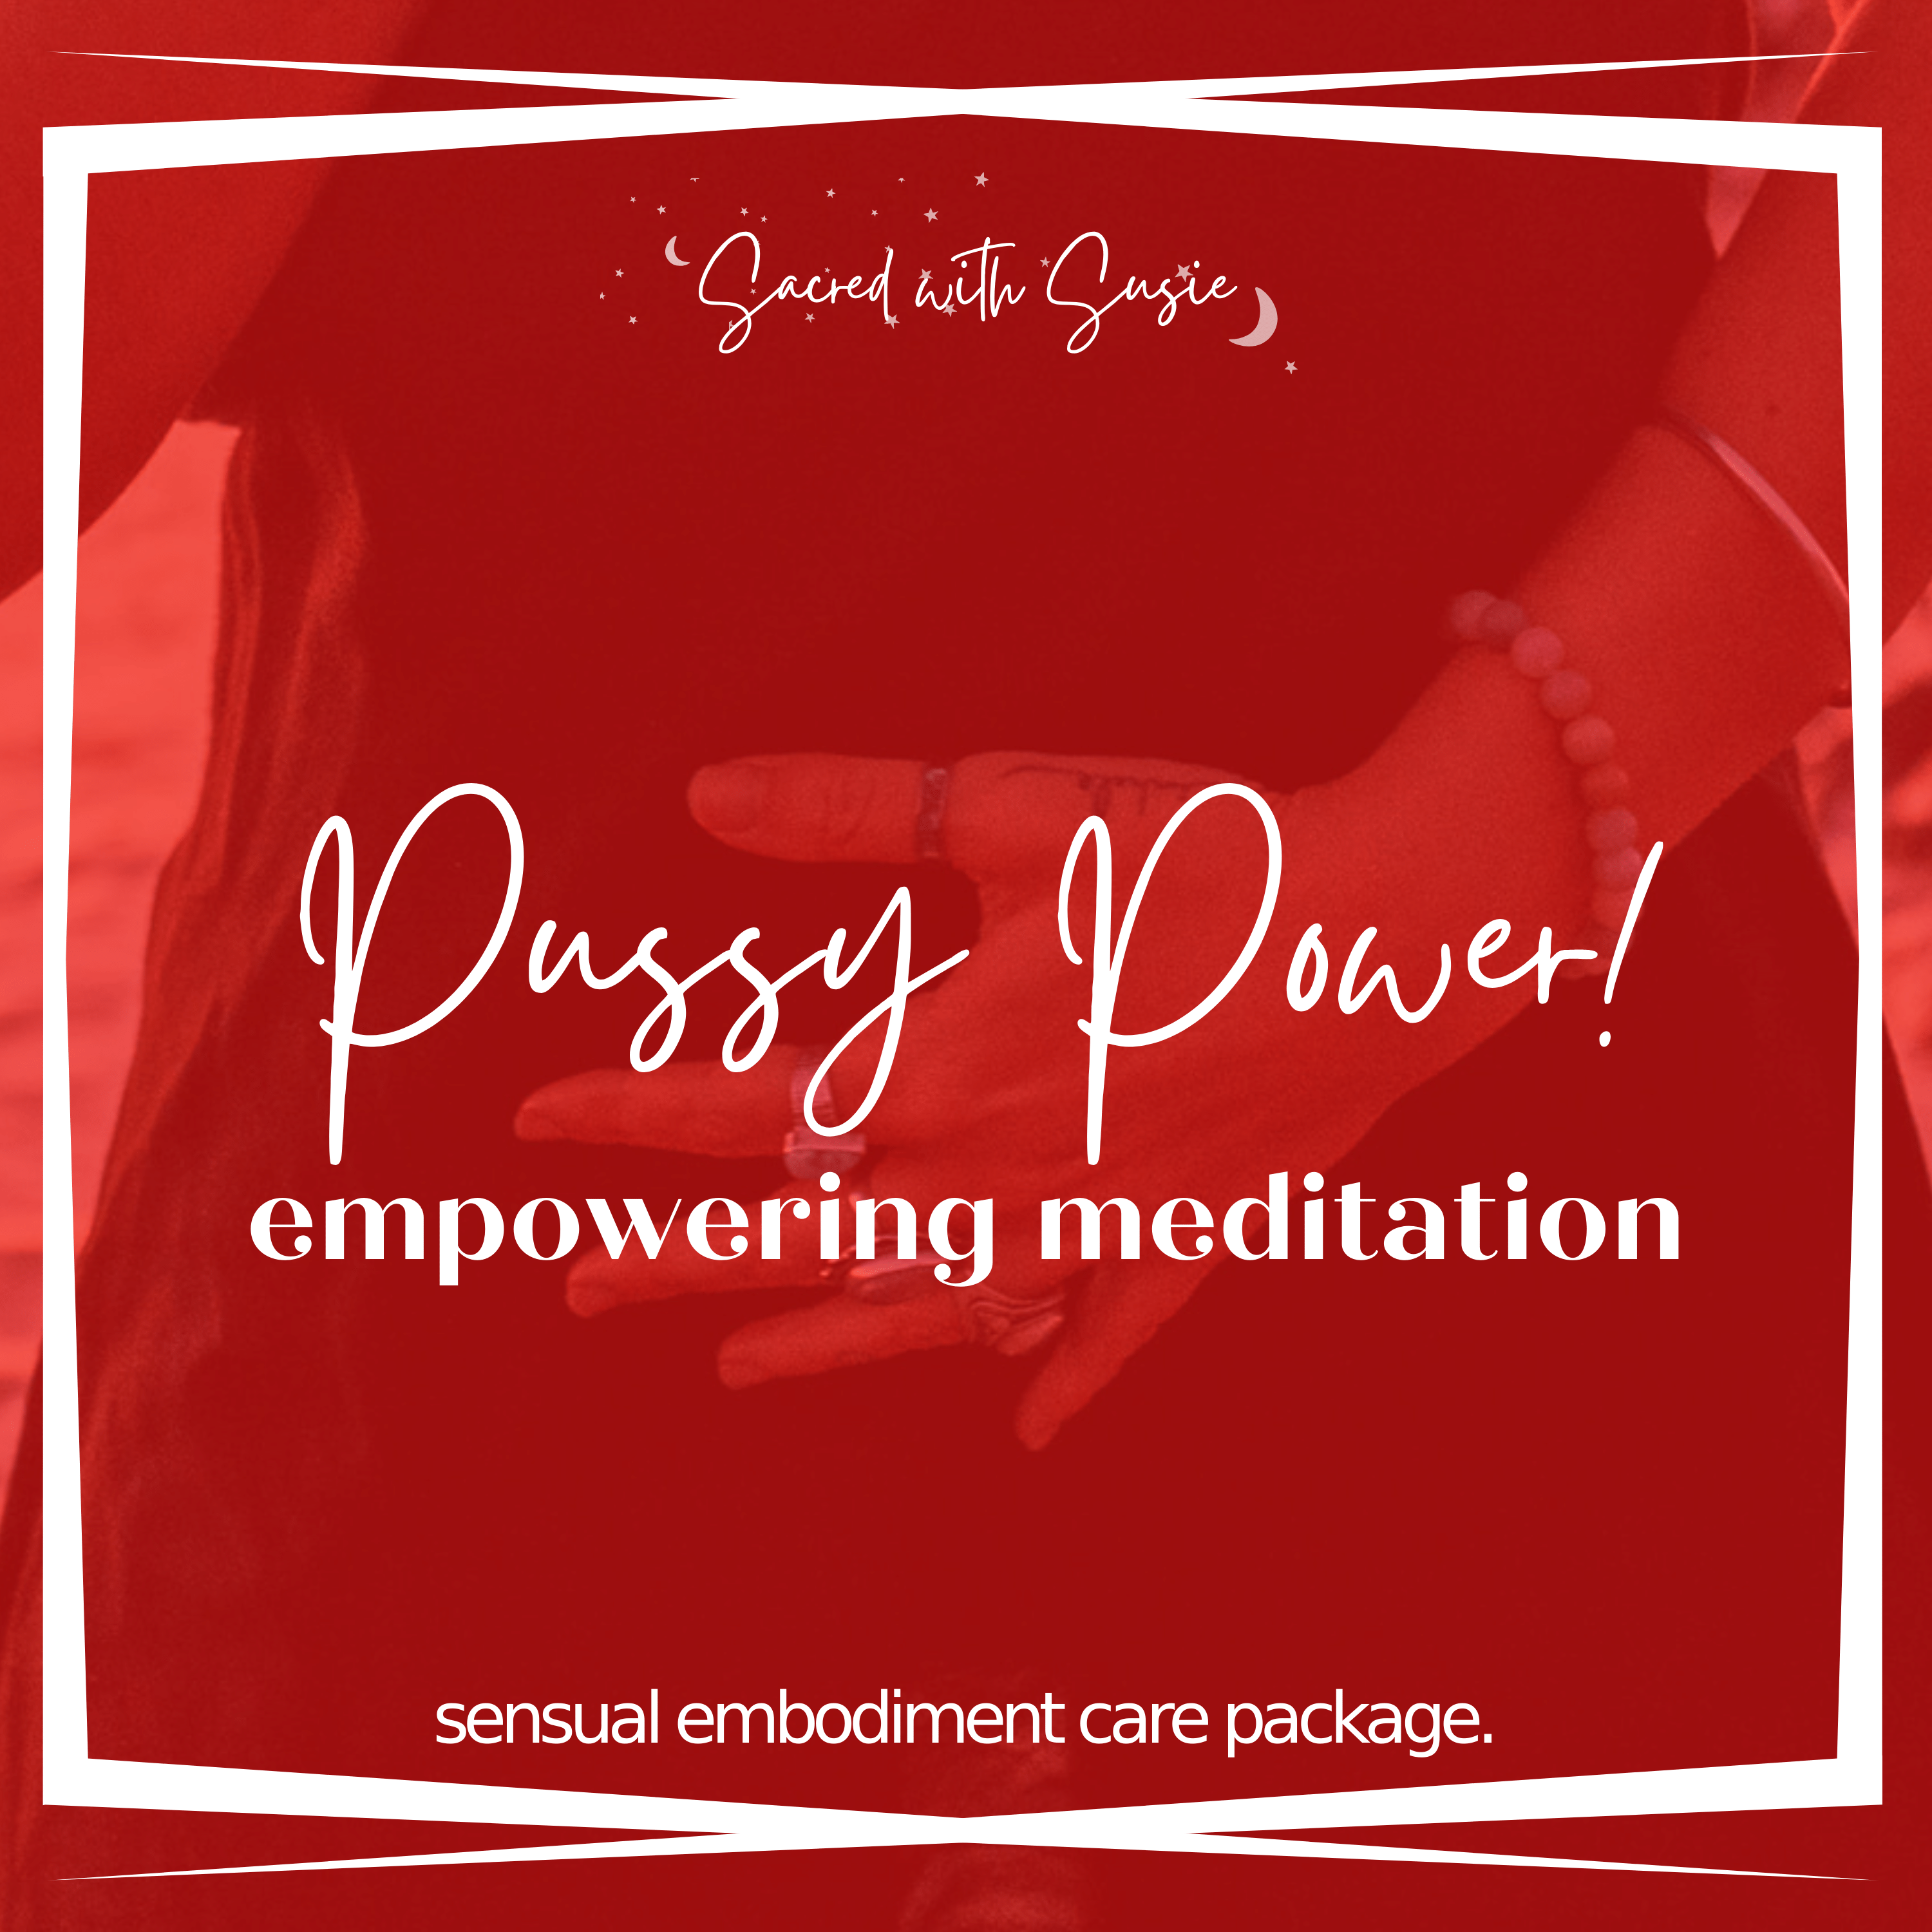 pussy power! meditation - sensual embodiment care package